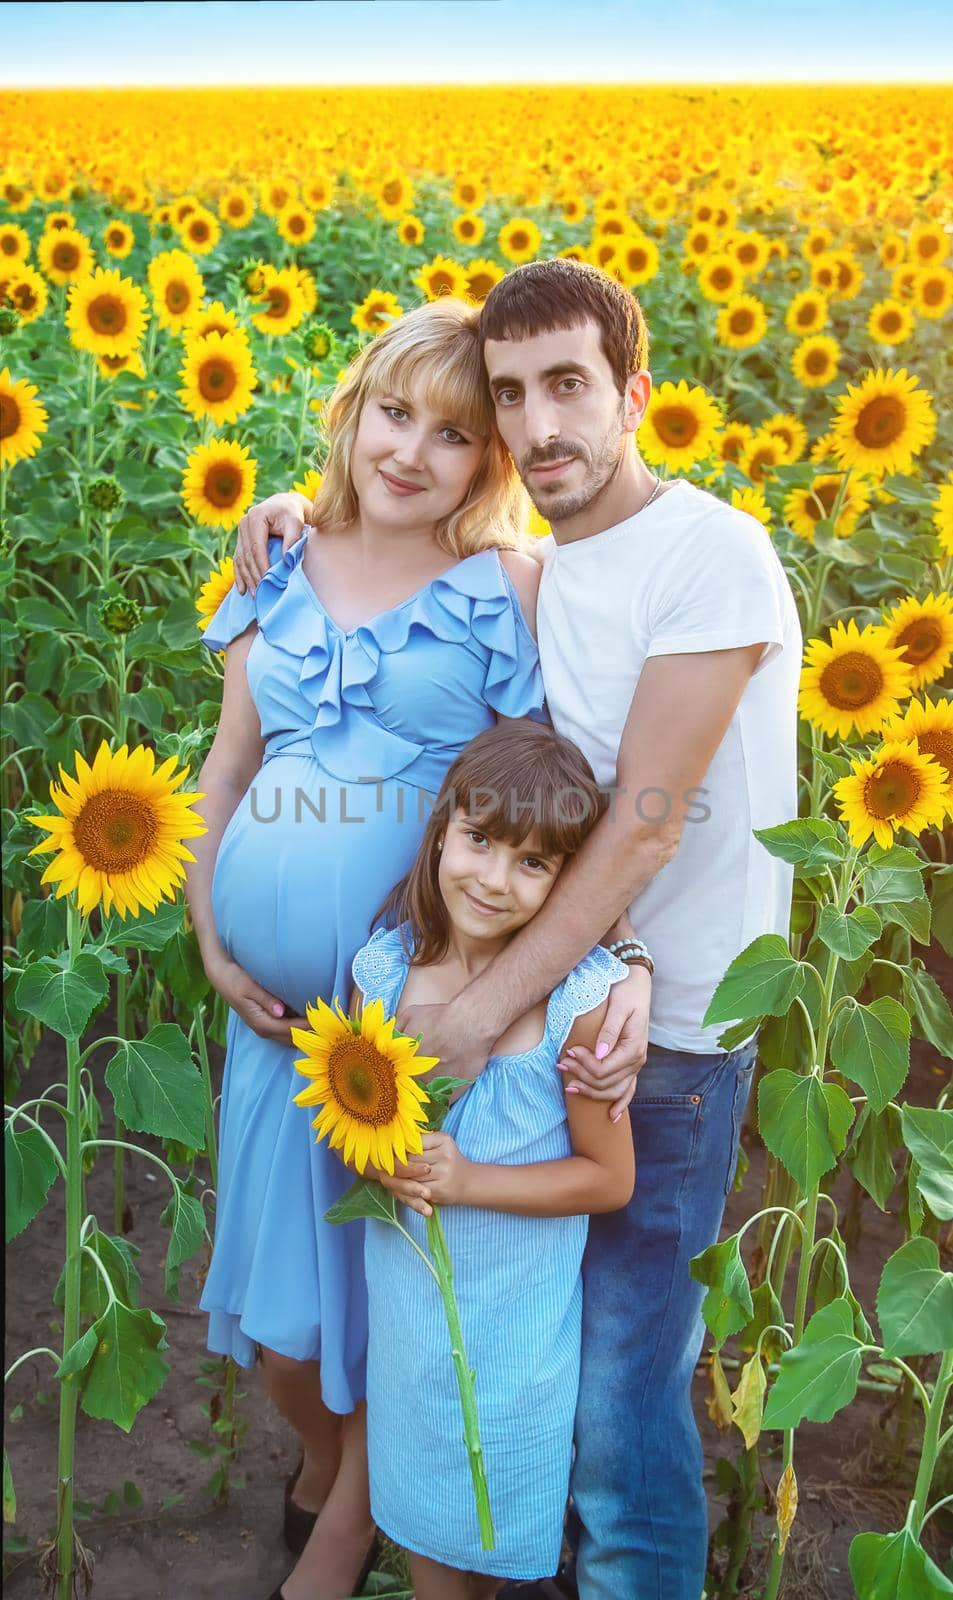 Family photo in a field of sunflowers Selective focus.